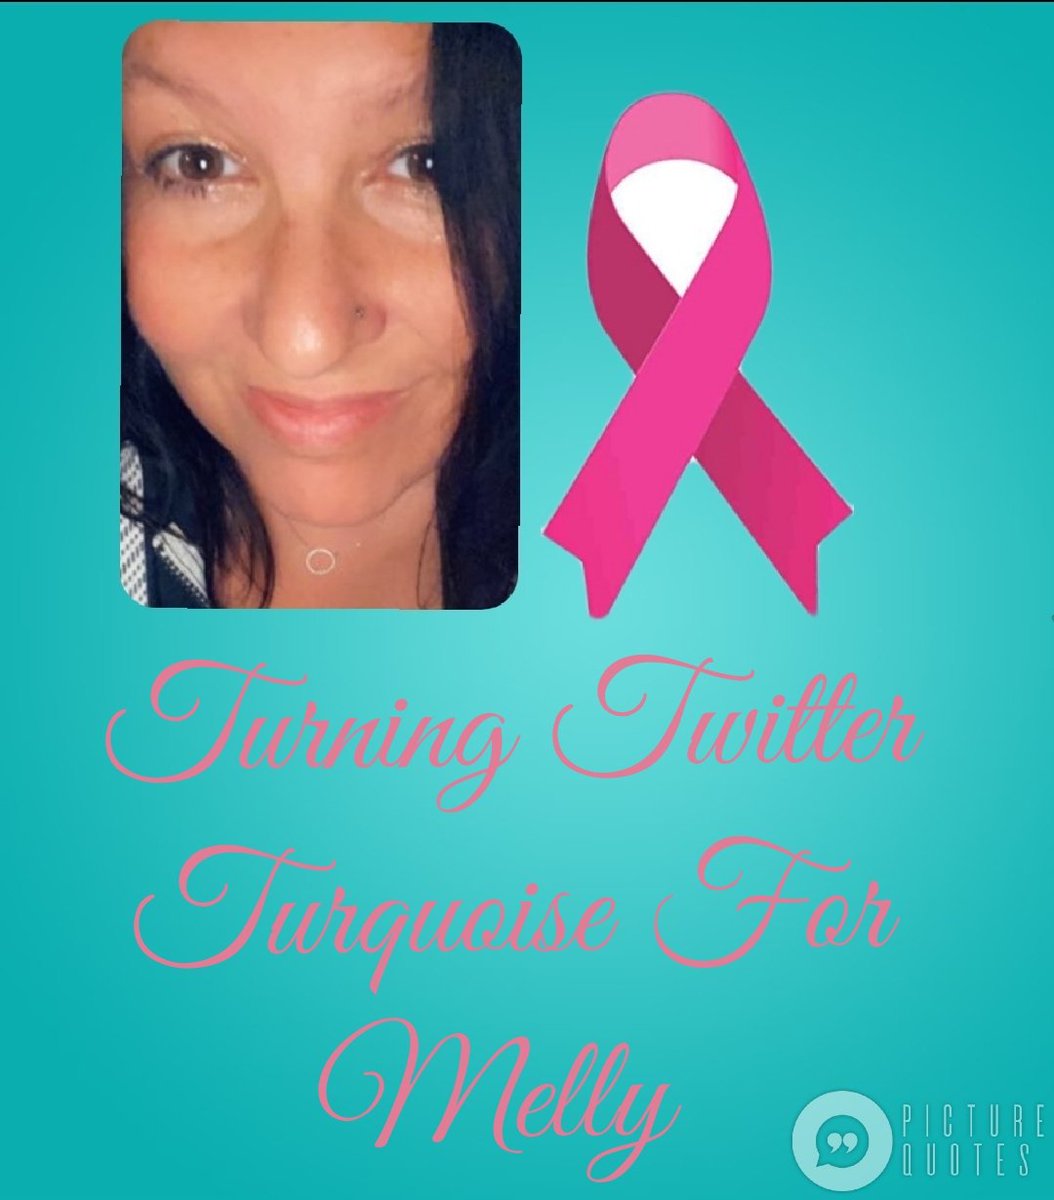 Fam, one week from today, our girl @mellylovesvols will ring the bell! It's been a long and tough journey for her, so to honor her we will be turning Twitter Turquoise once again to show our support. I am tagging a bunch of you so please share. Wear your turquoise on May 6th.